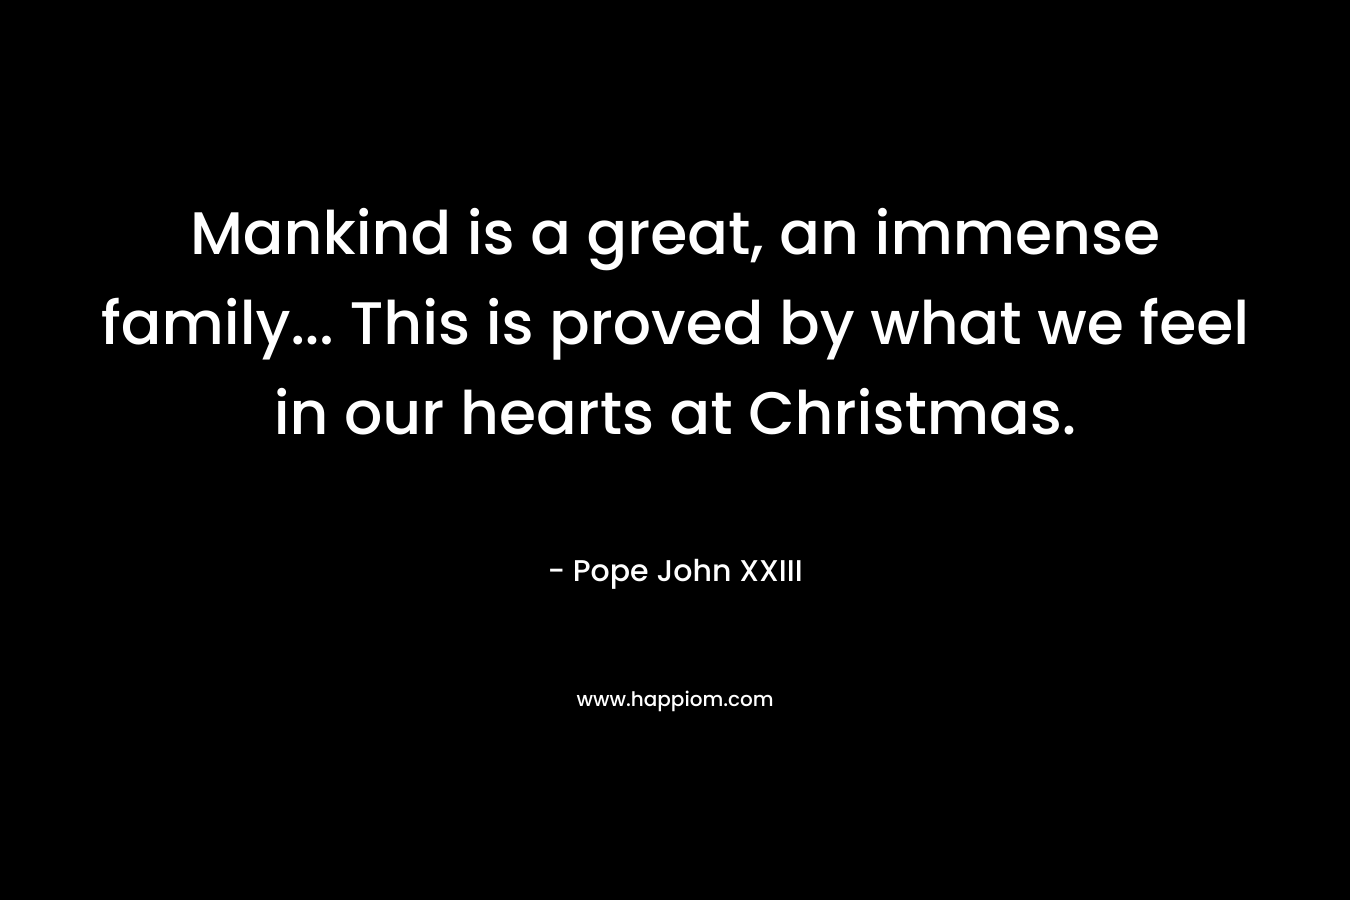 Mankind is a great, an immense family... This is proved by what we feel in our hearts at Christmas.